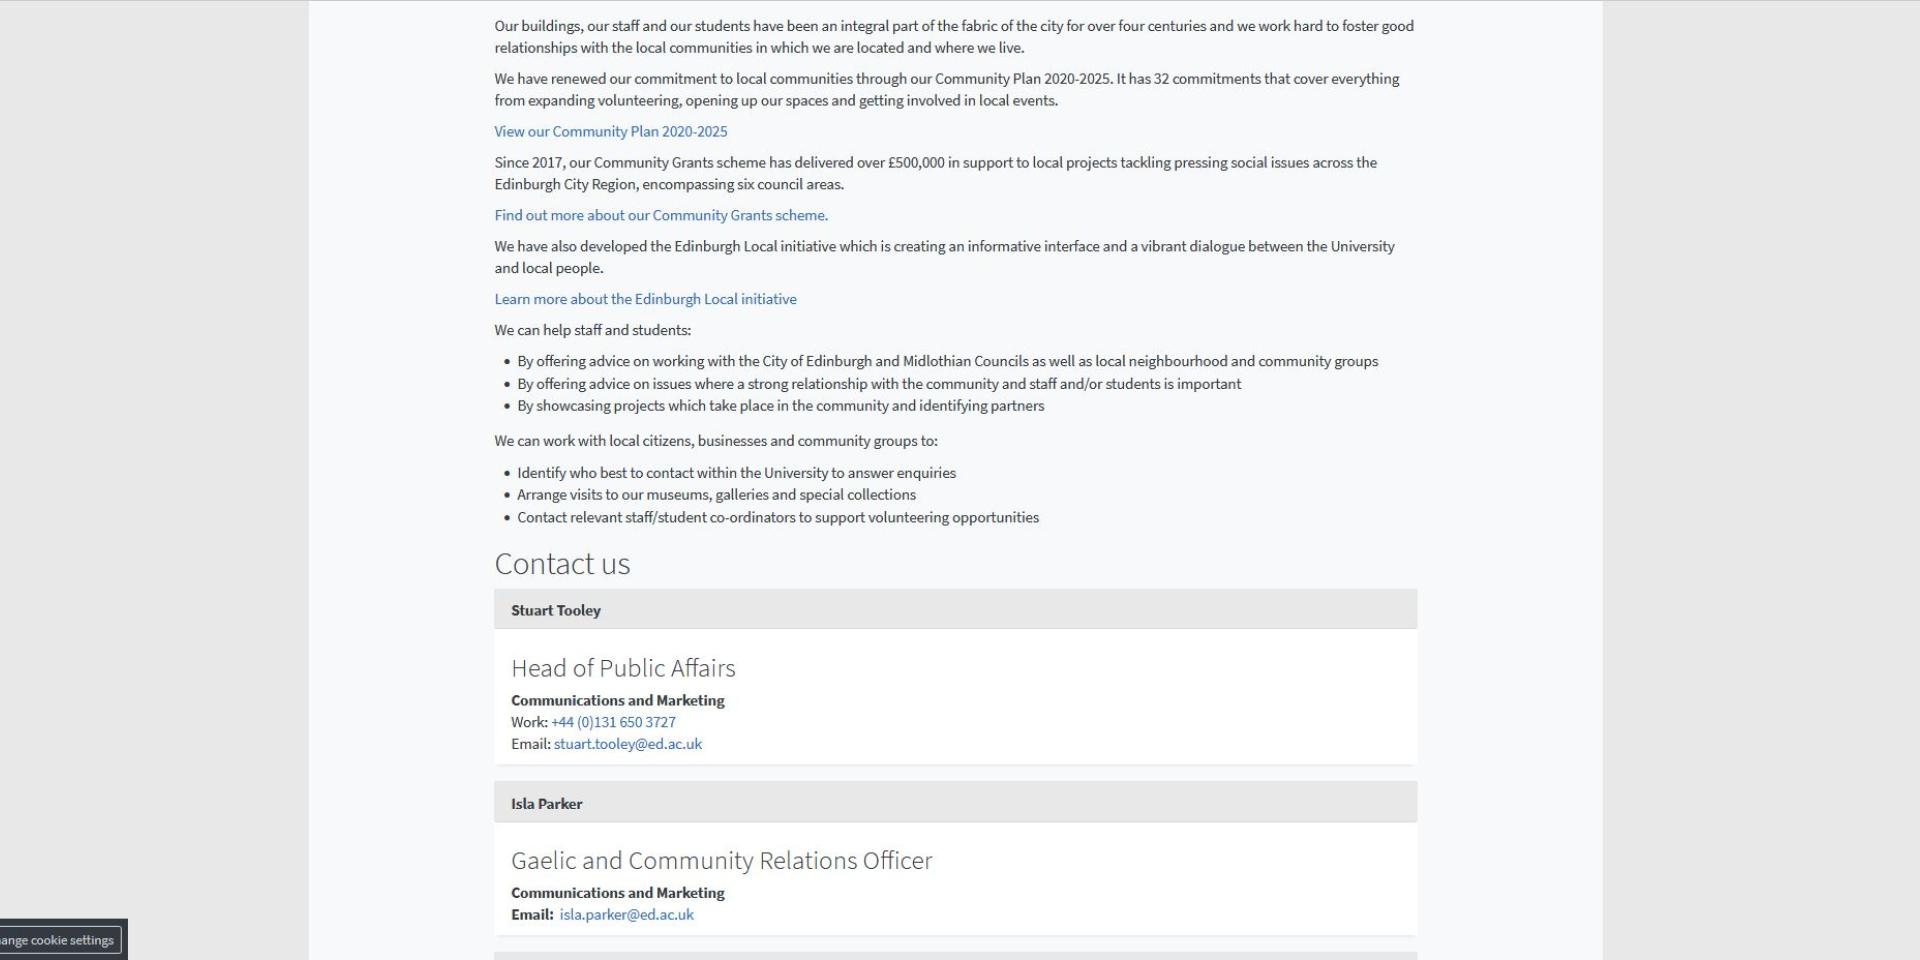 A screenshot of a generic content page with text, bullet point lists, blue links formatted correctly on their own line, and light grey feature boxes detailing staff contact details.